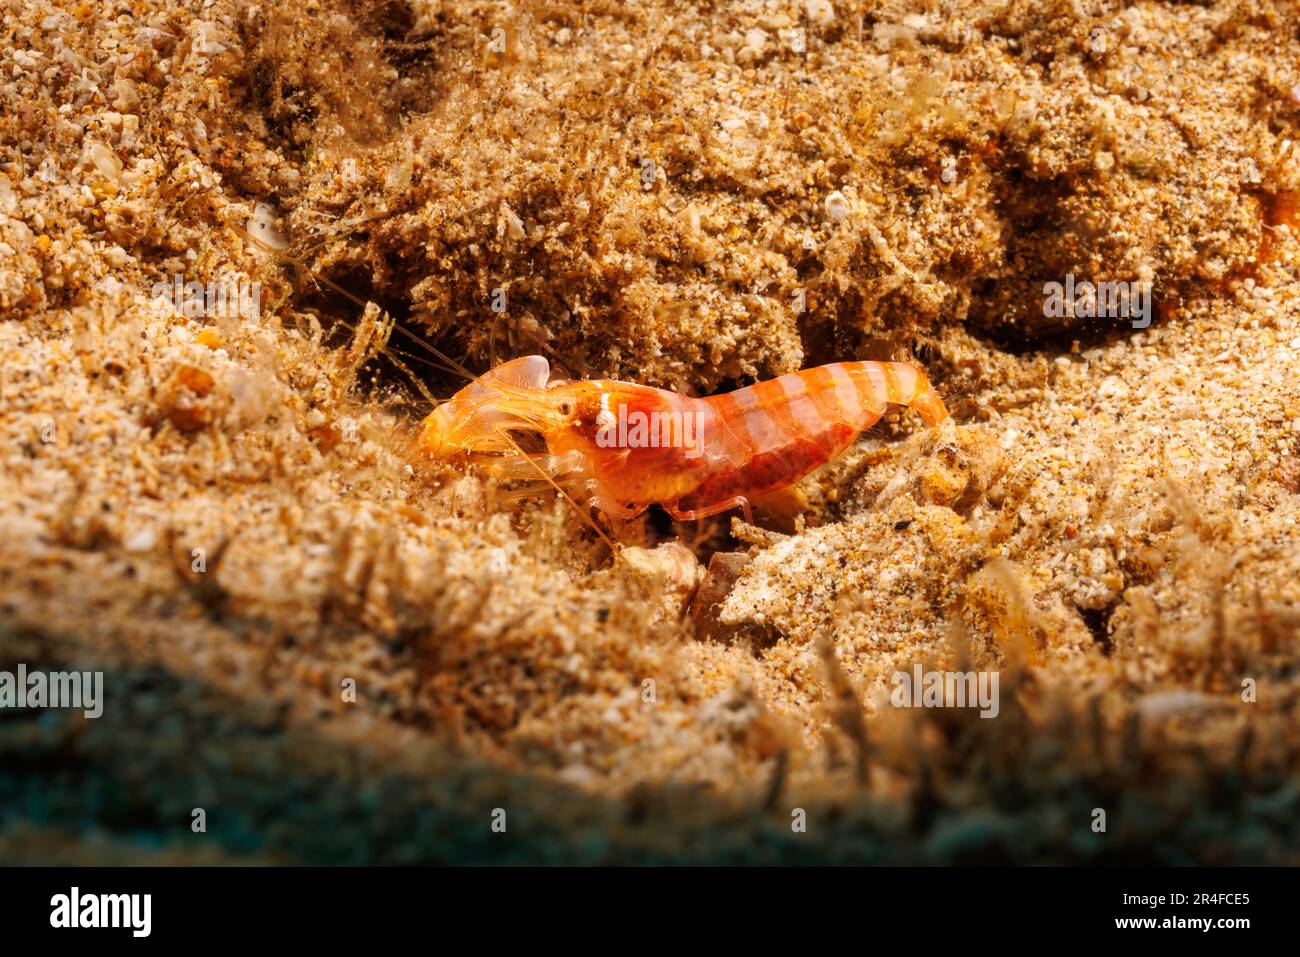 This orange banded snapping shrimp, Alpheus sp. does not have a species name at this time but is part of the macrocheles group. They are common in Haw Stock Photo